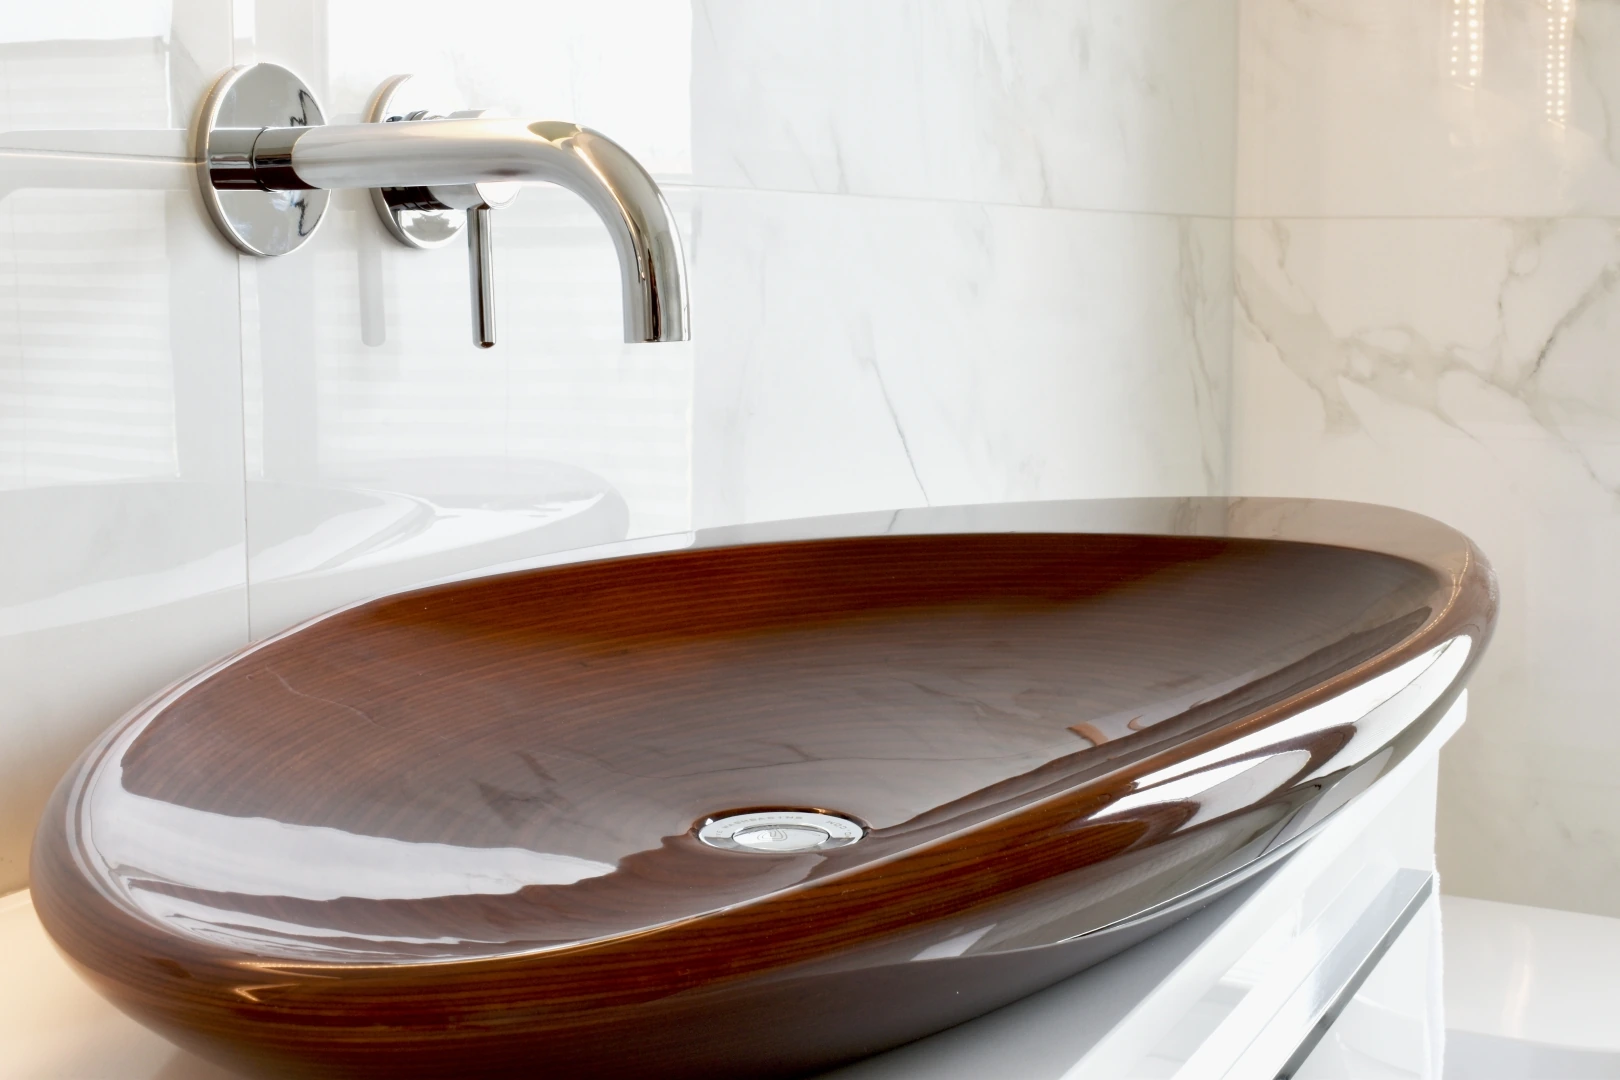 How to design a bathroom with a wooden freestanding bathtub and sinks ?